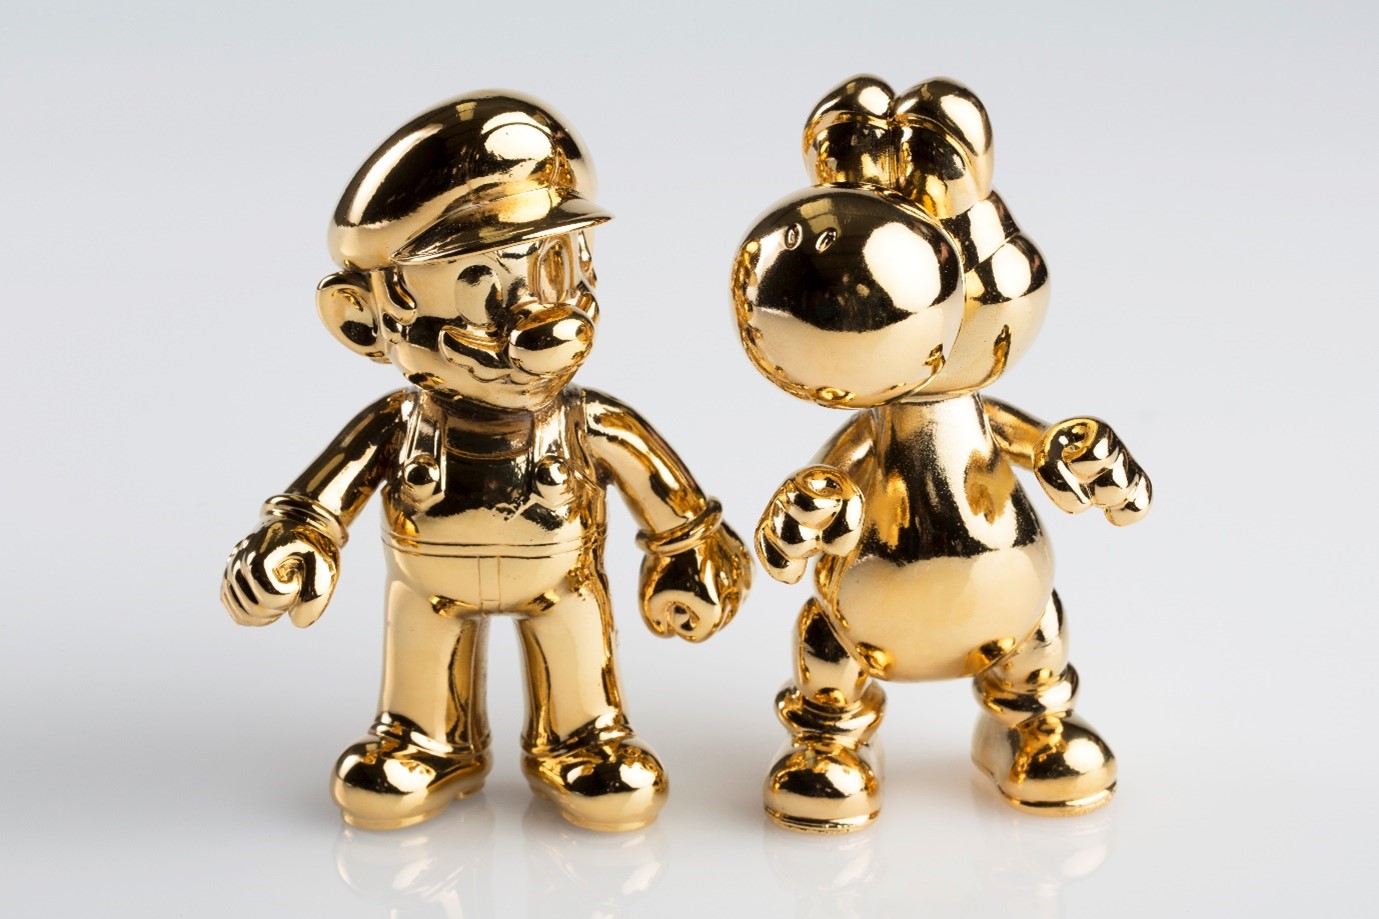 Electroformed and gold plated Super Mario and Yoshi plastictoys